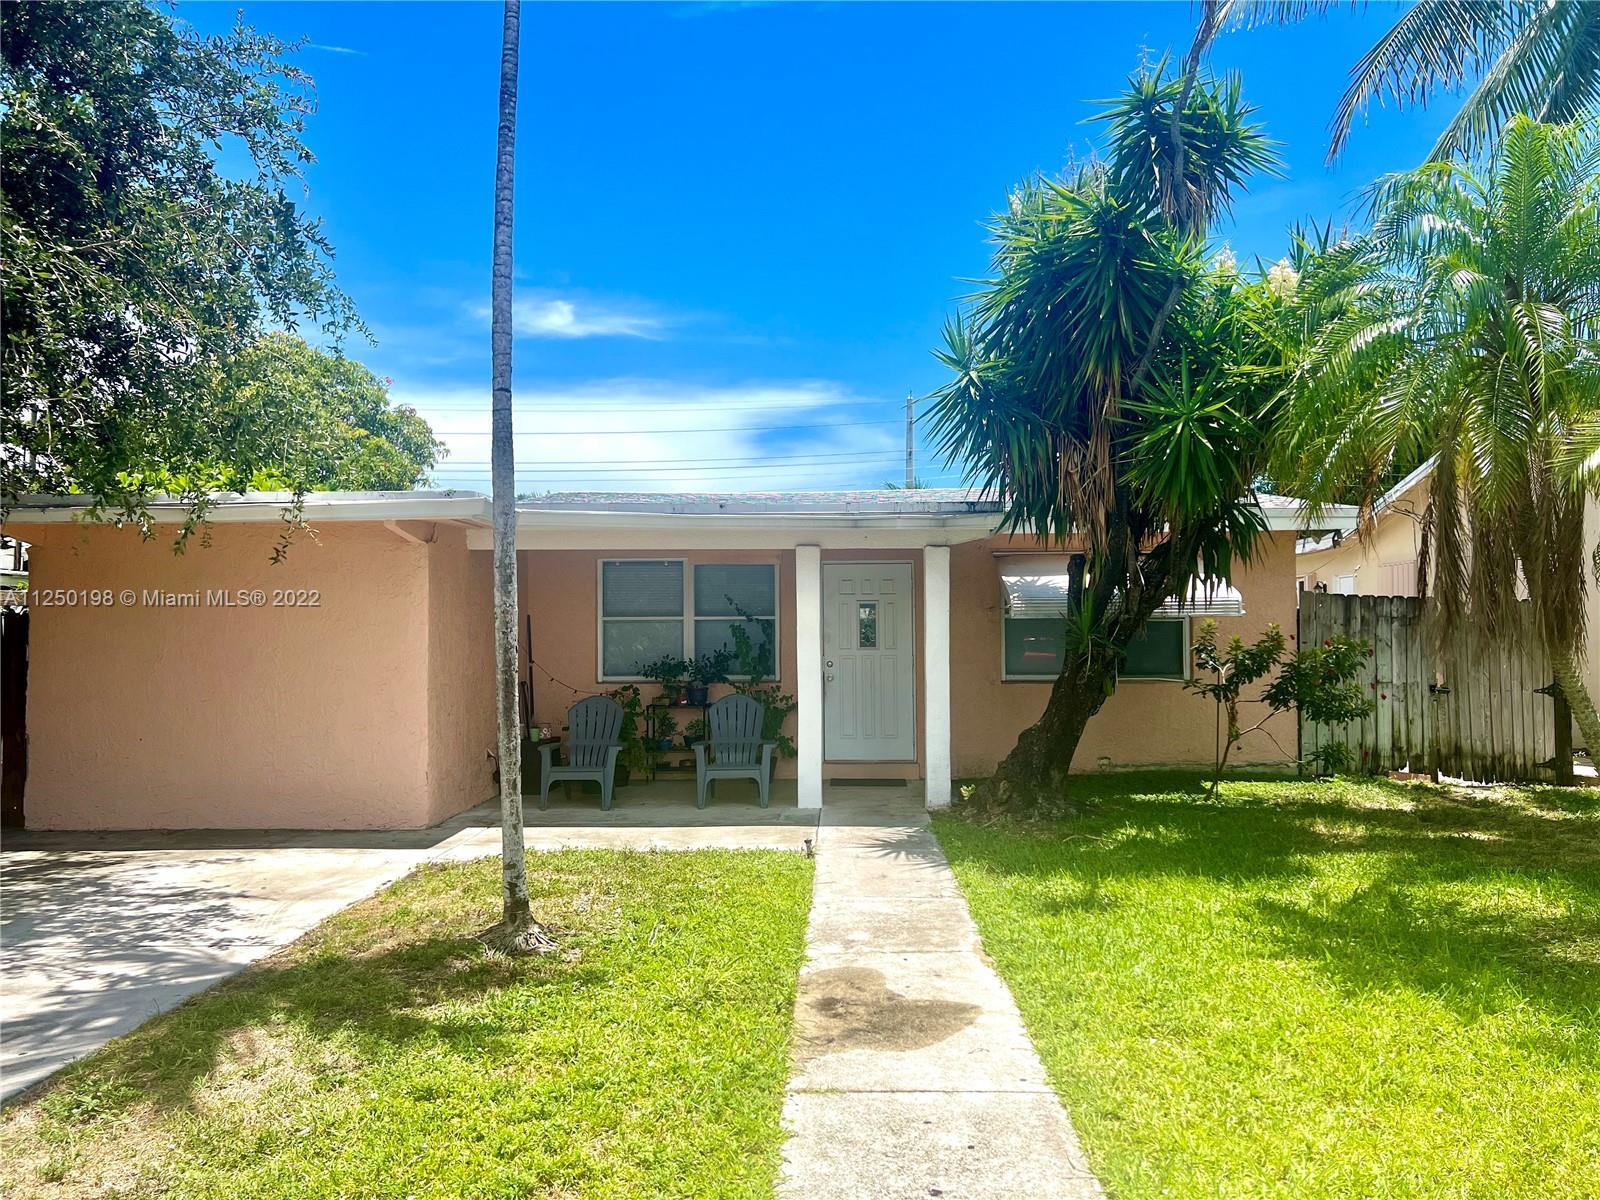 Great opportunity to own a Home at East of Pompano Beach. It is a minutes from the beach, shopping c